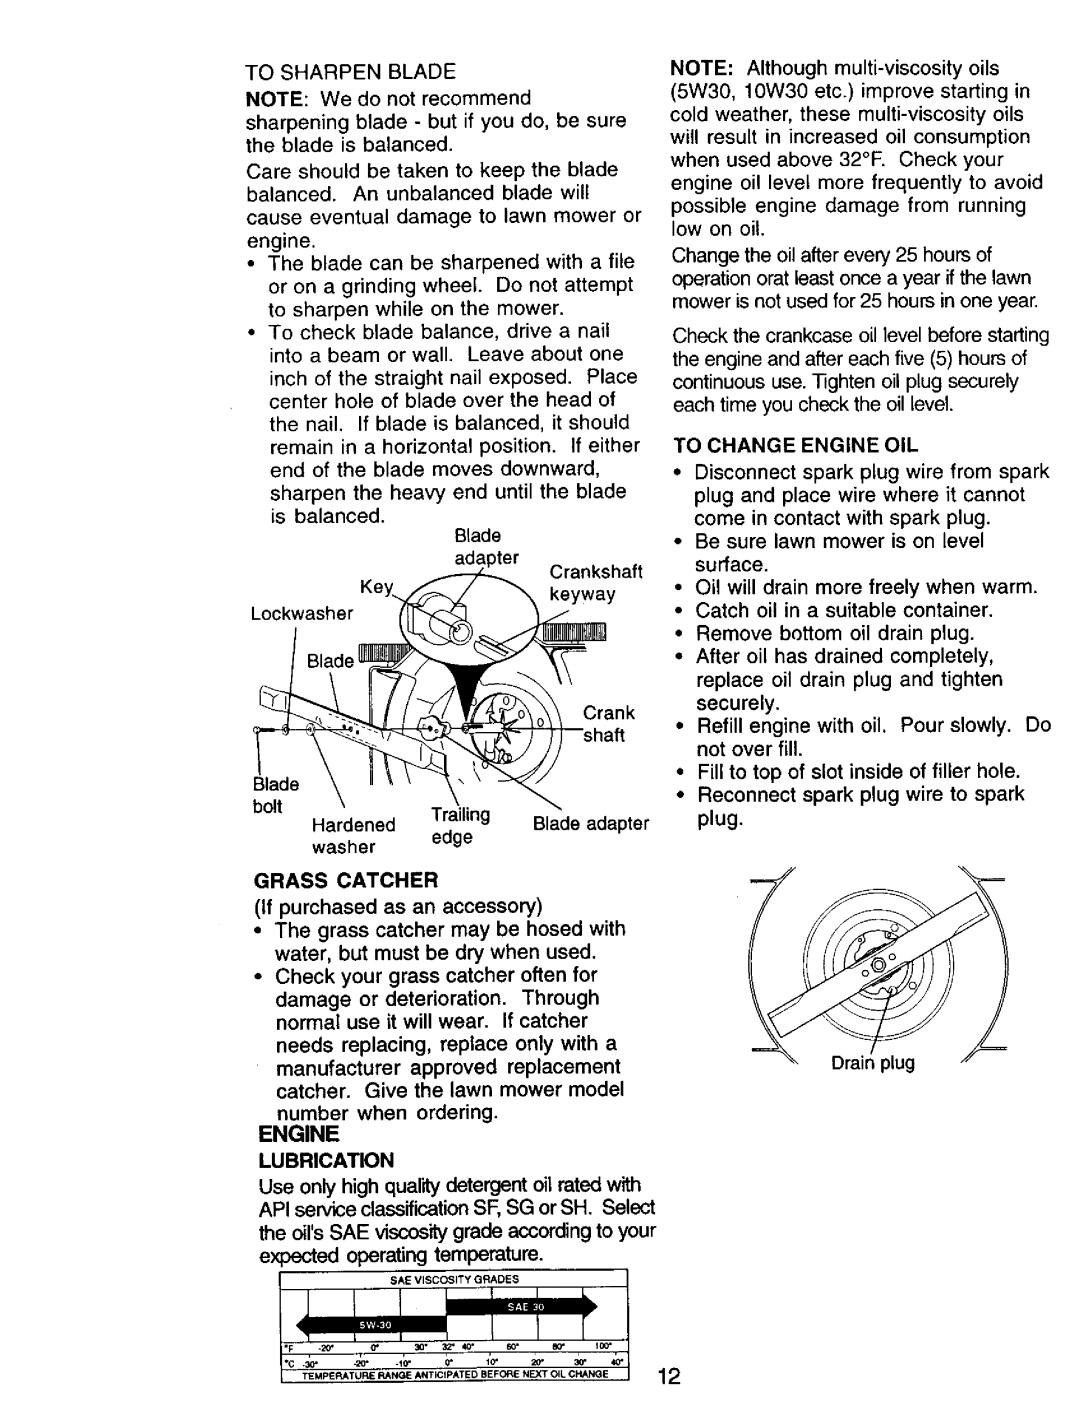 Craftsman 917.38741 owner manual TO SHARPEN BLADE NOTE We do not recommend, cause eventual damage to lawn mower or engine 